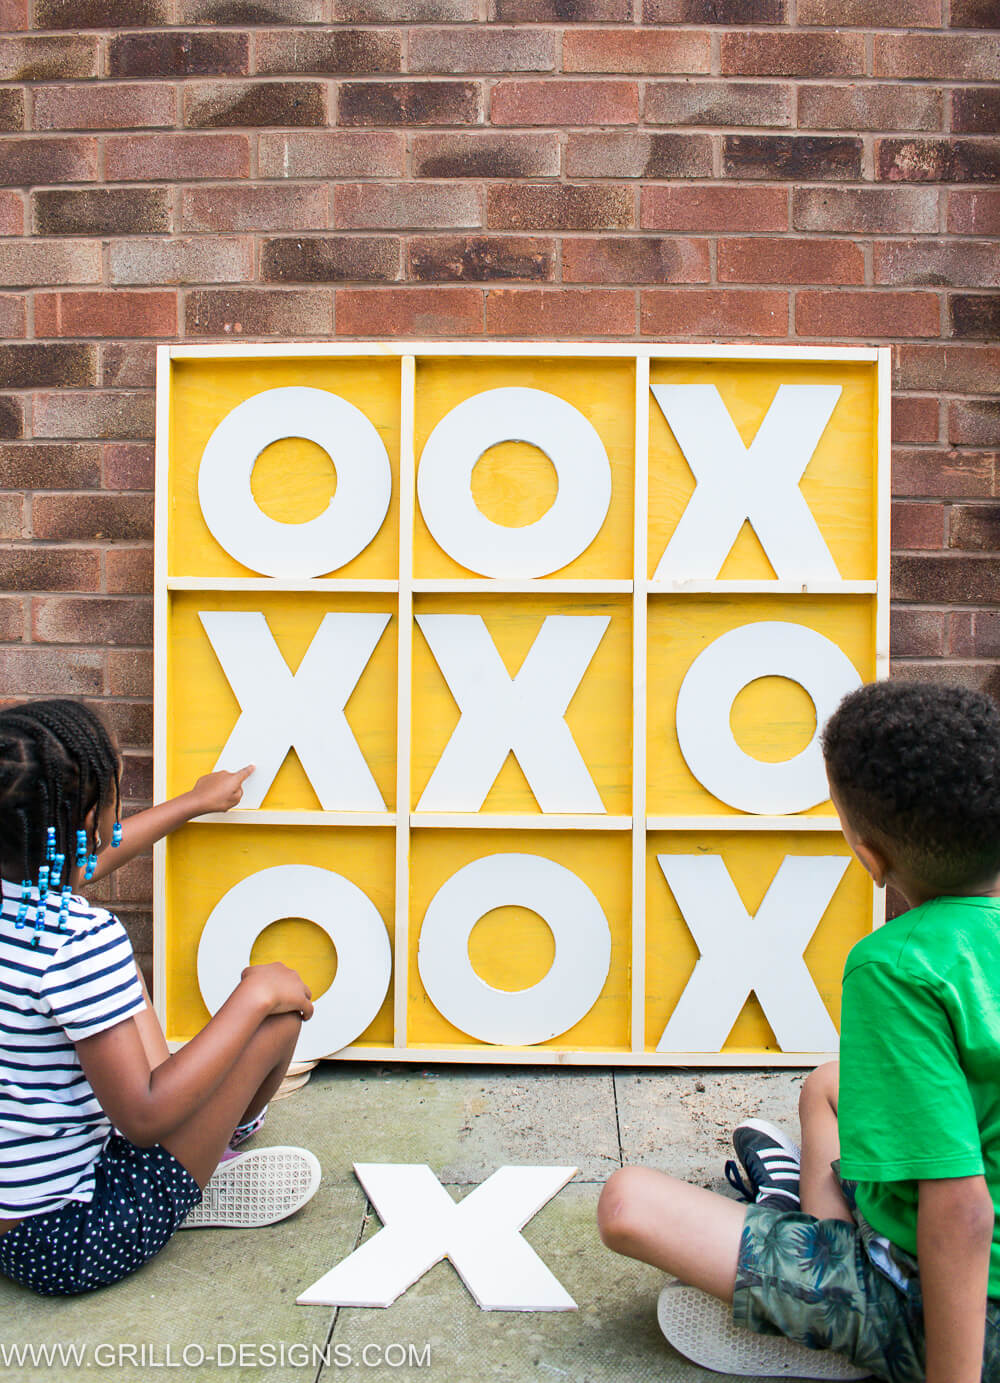 Make a Giant Wooden Noughts & Crosses Game Board!